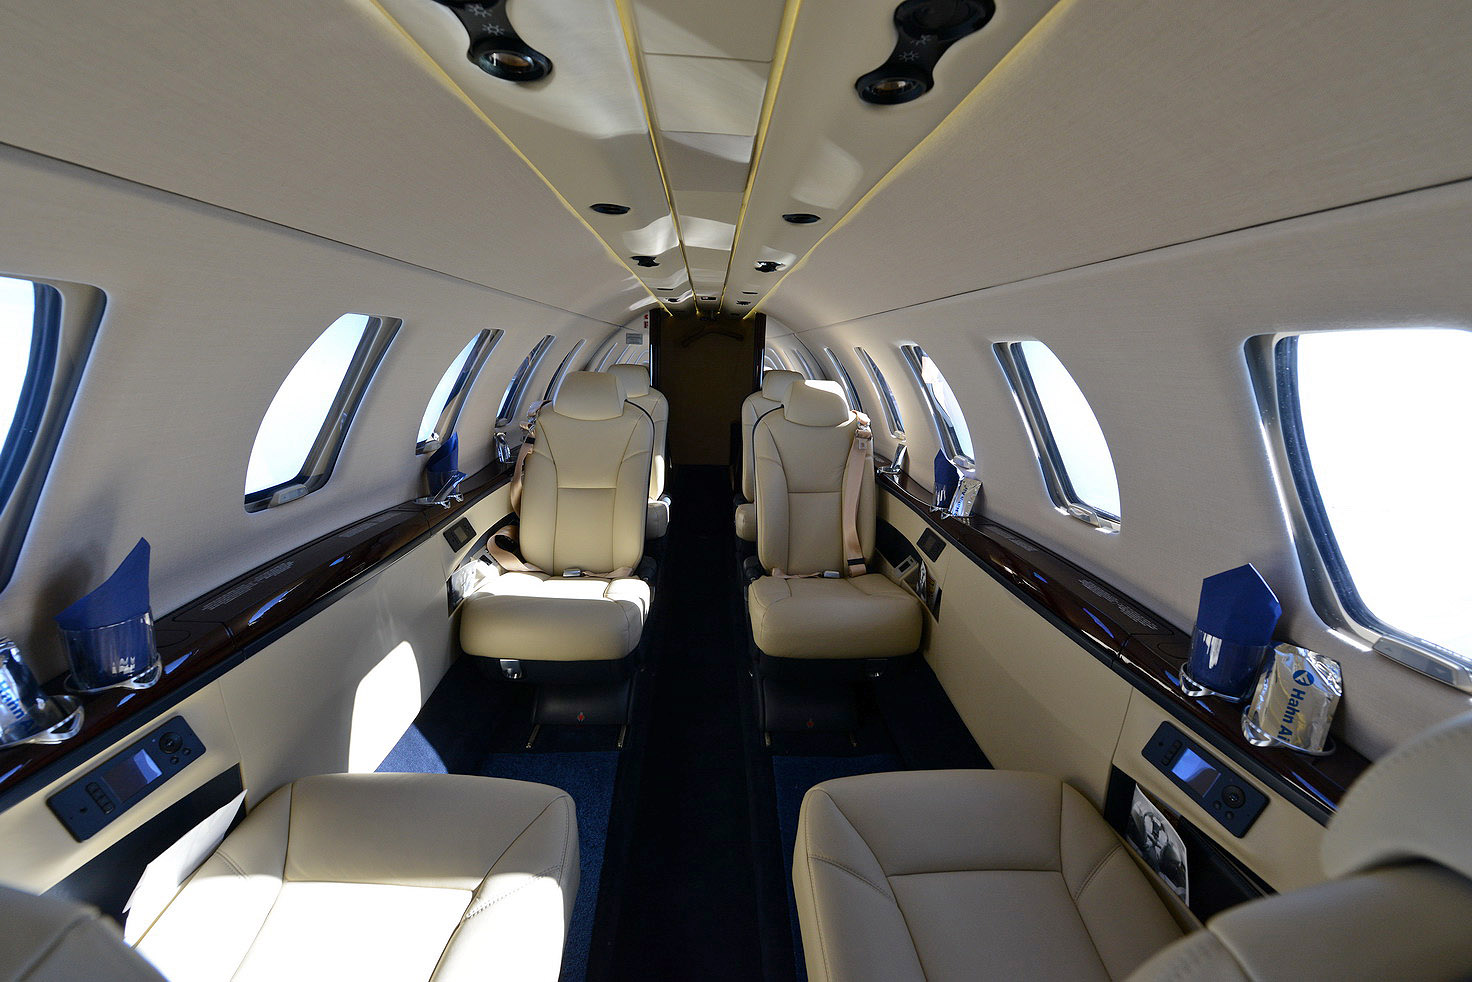 Fly your own Hahn Air Business Jet for just 180 Euros!